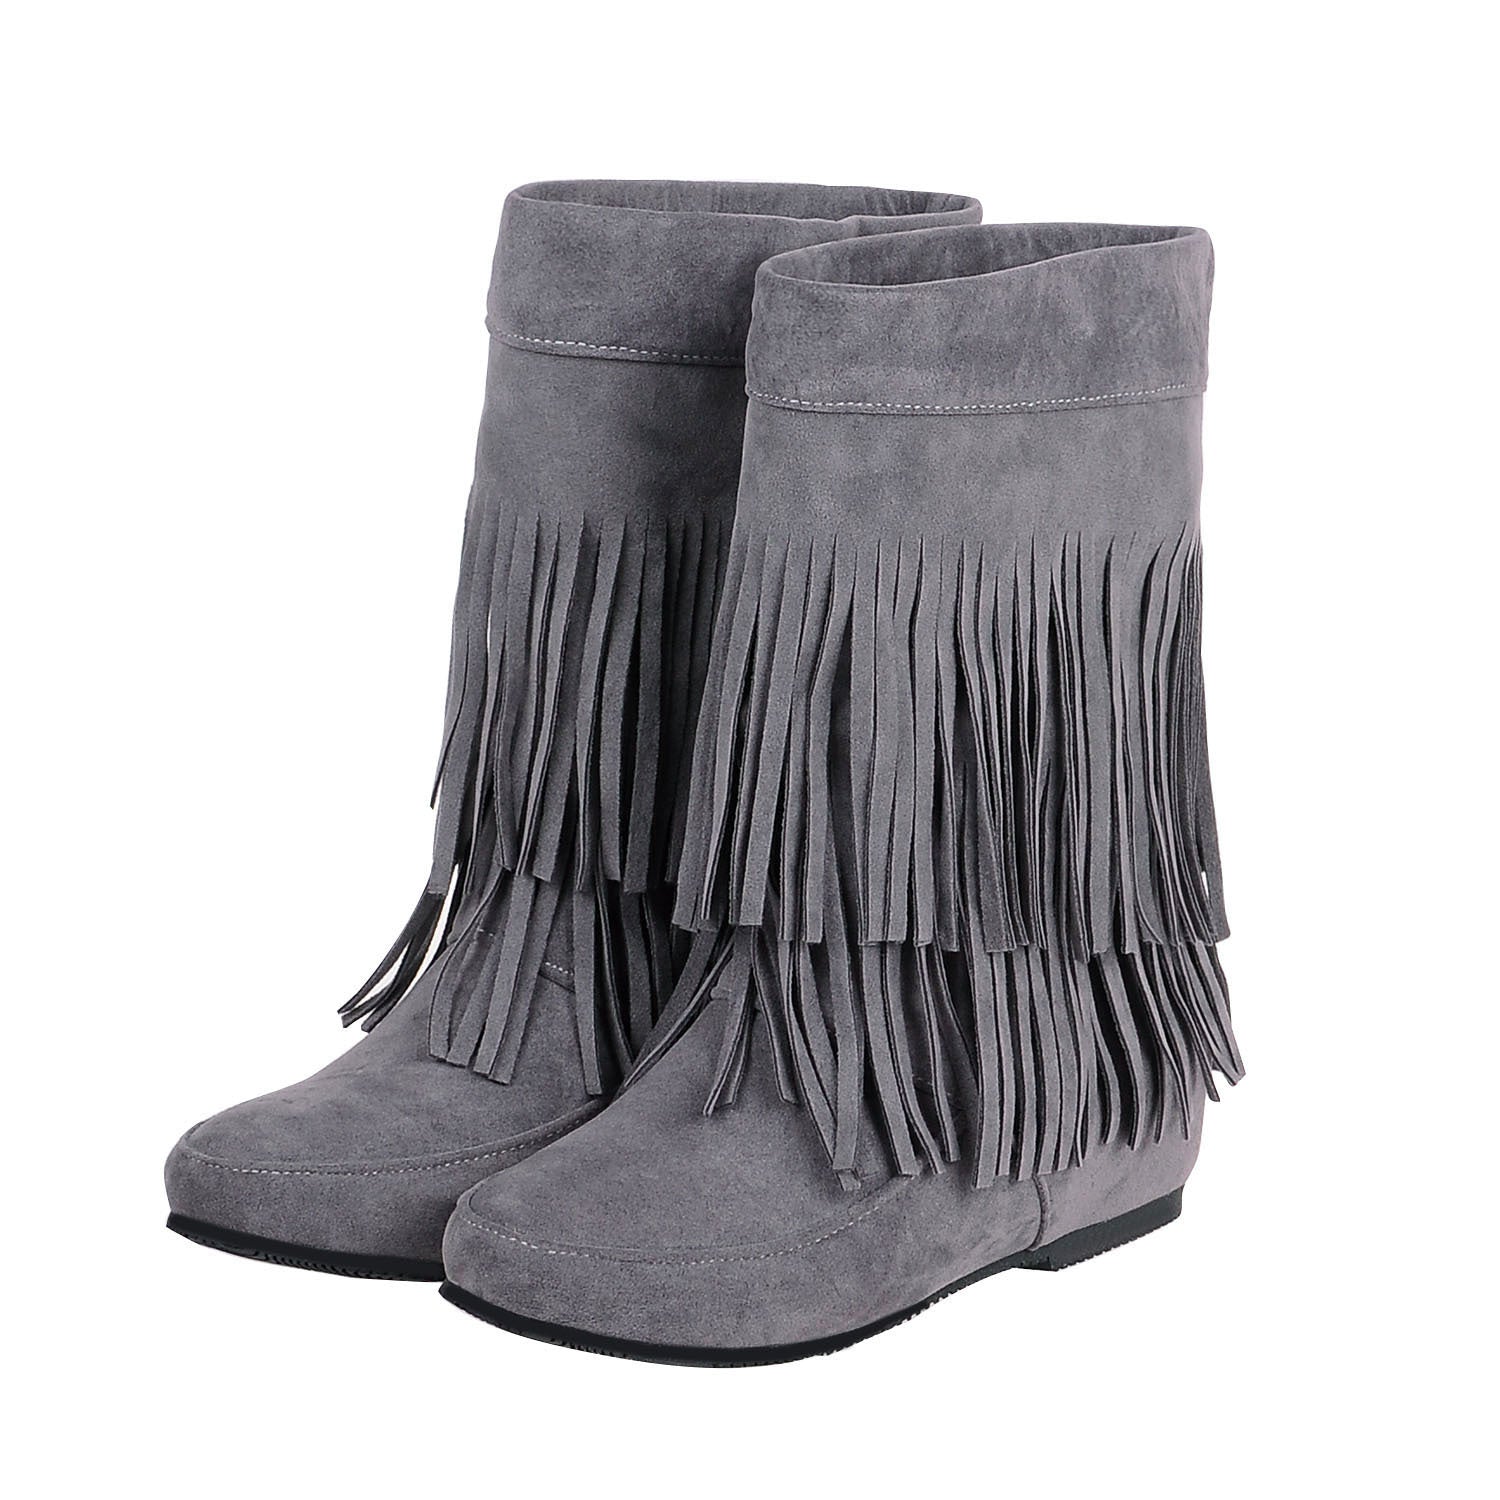 Solid Color Round Toe Tassels Inside Heels Half Boots